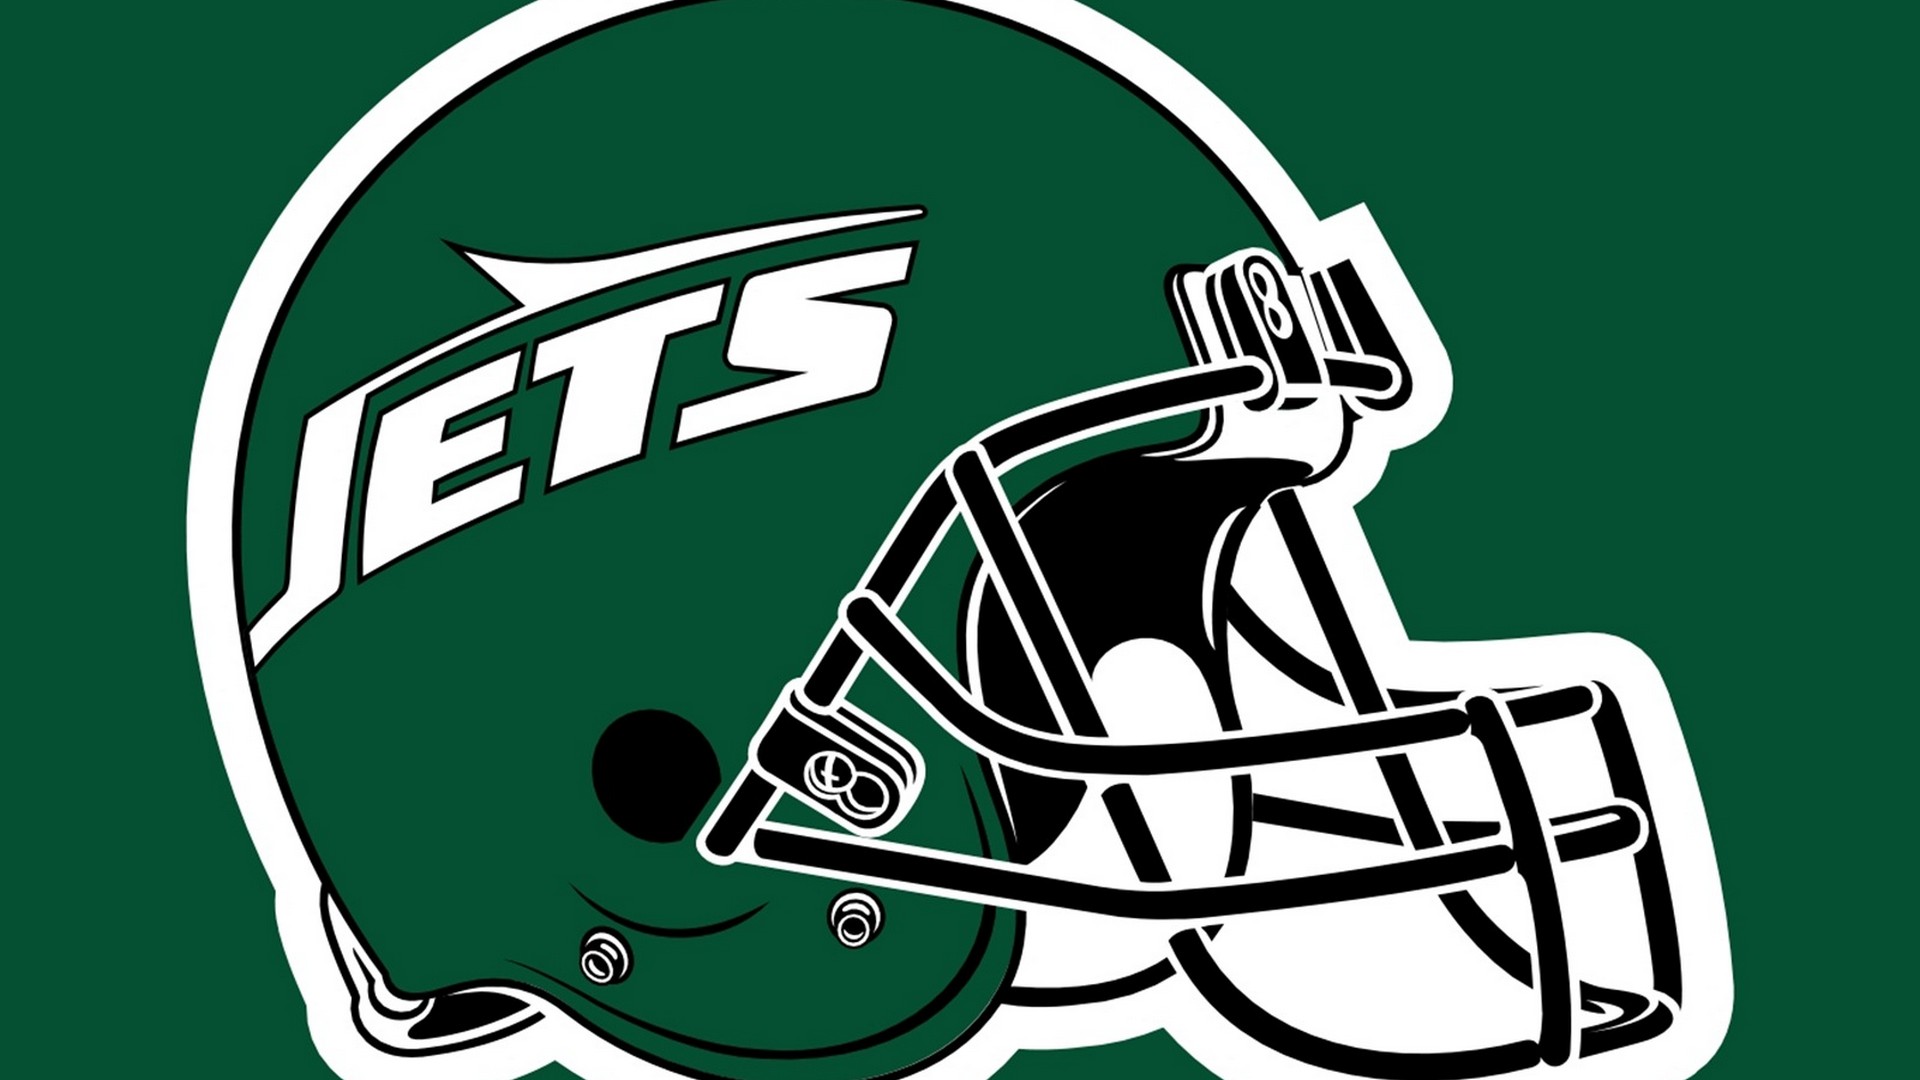 New York Jets Desktop Wallpapers With Resolution 1920X1080 pixel. You can make this wallpaper for your Mac or Windows Desktop Background, iPhone, Android or Tablet and another Smartphone device for free